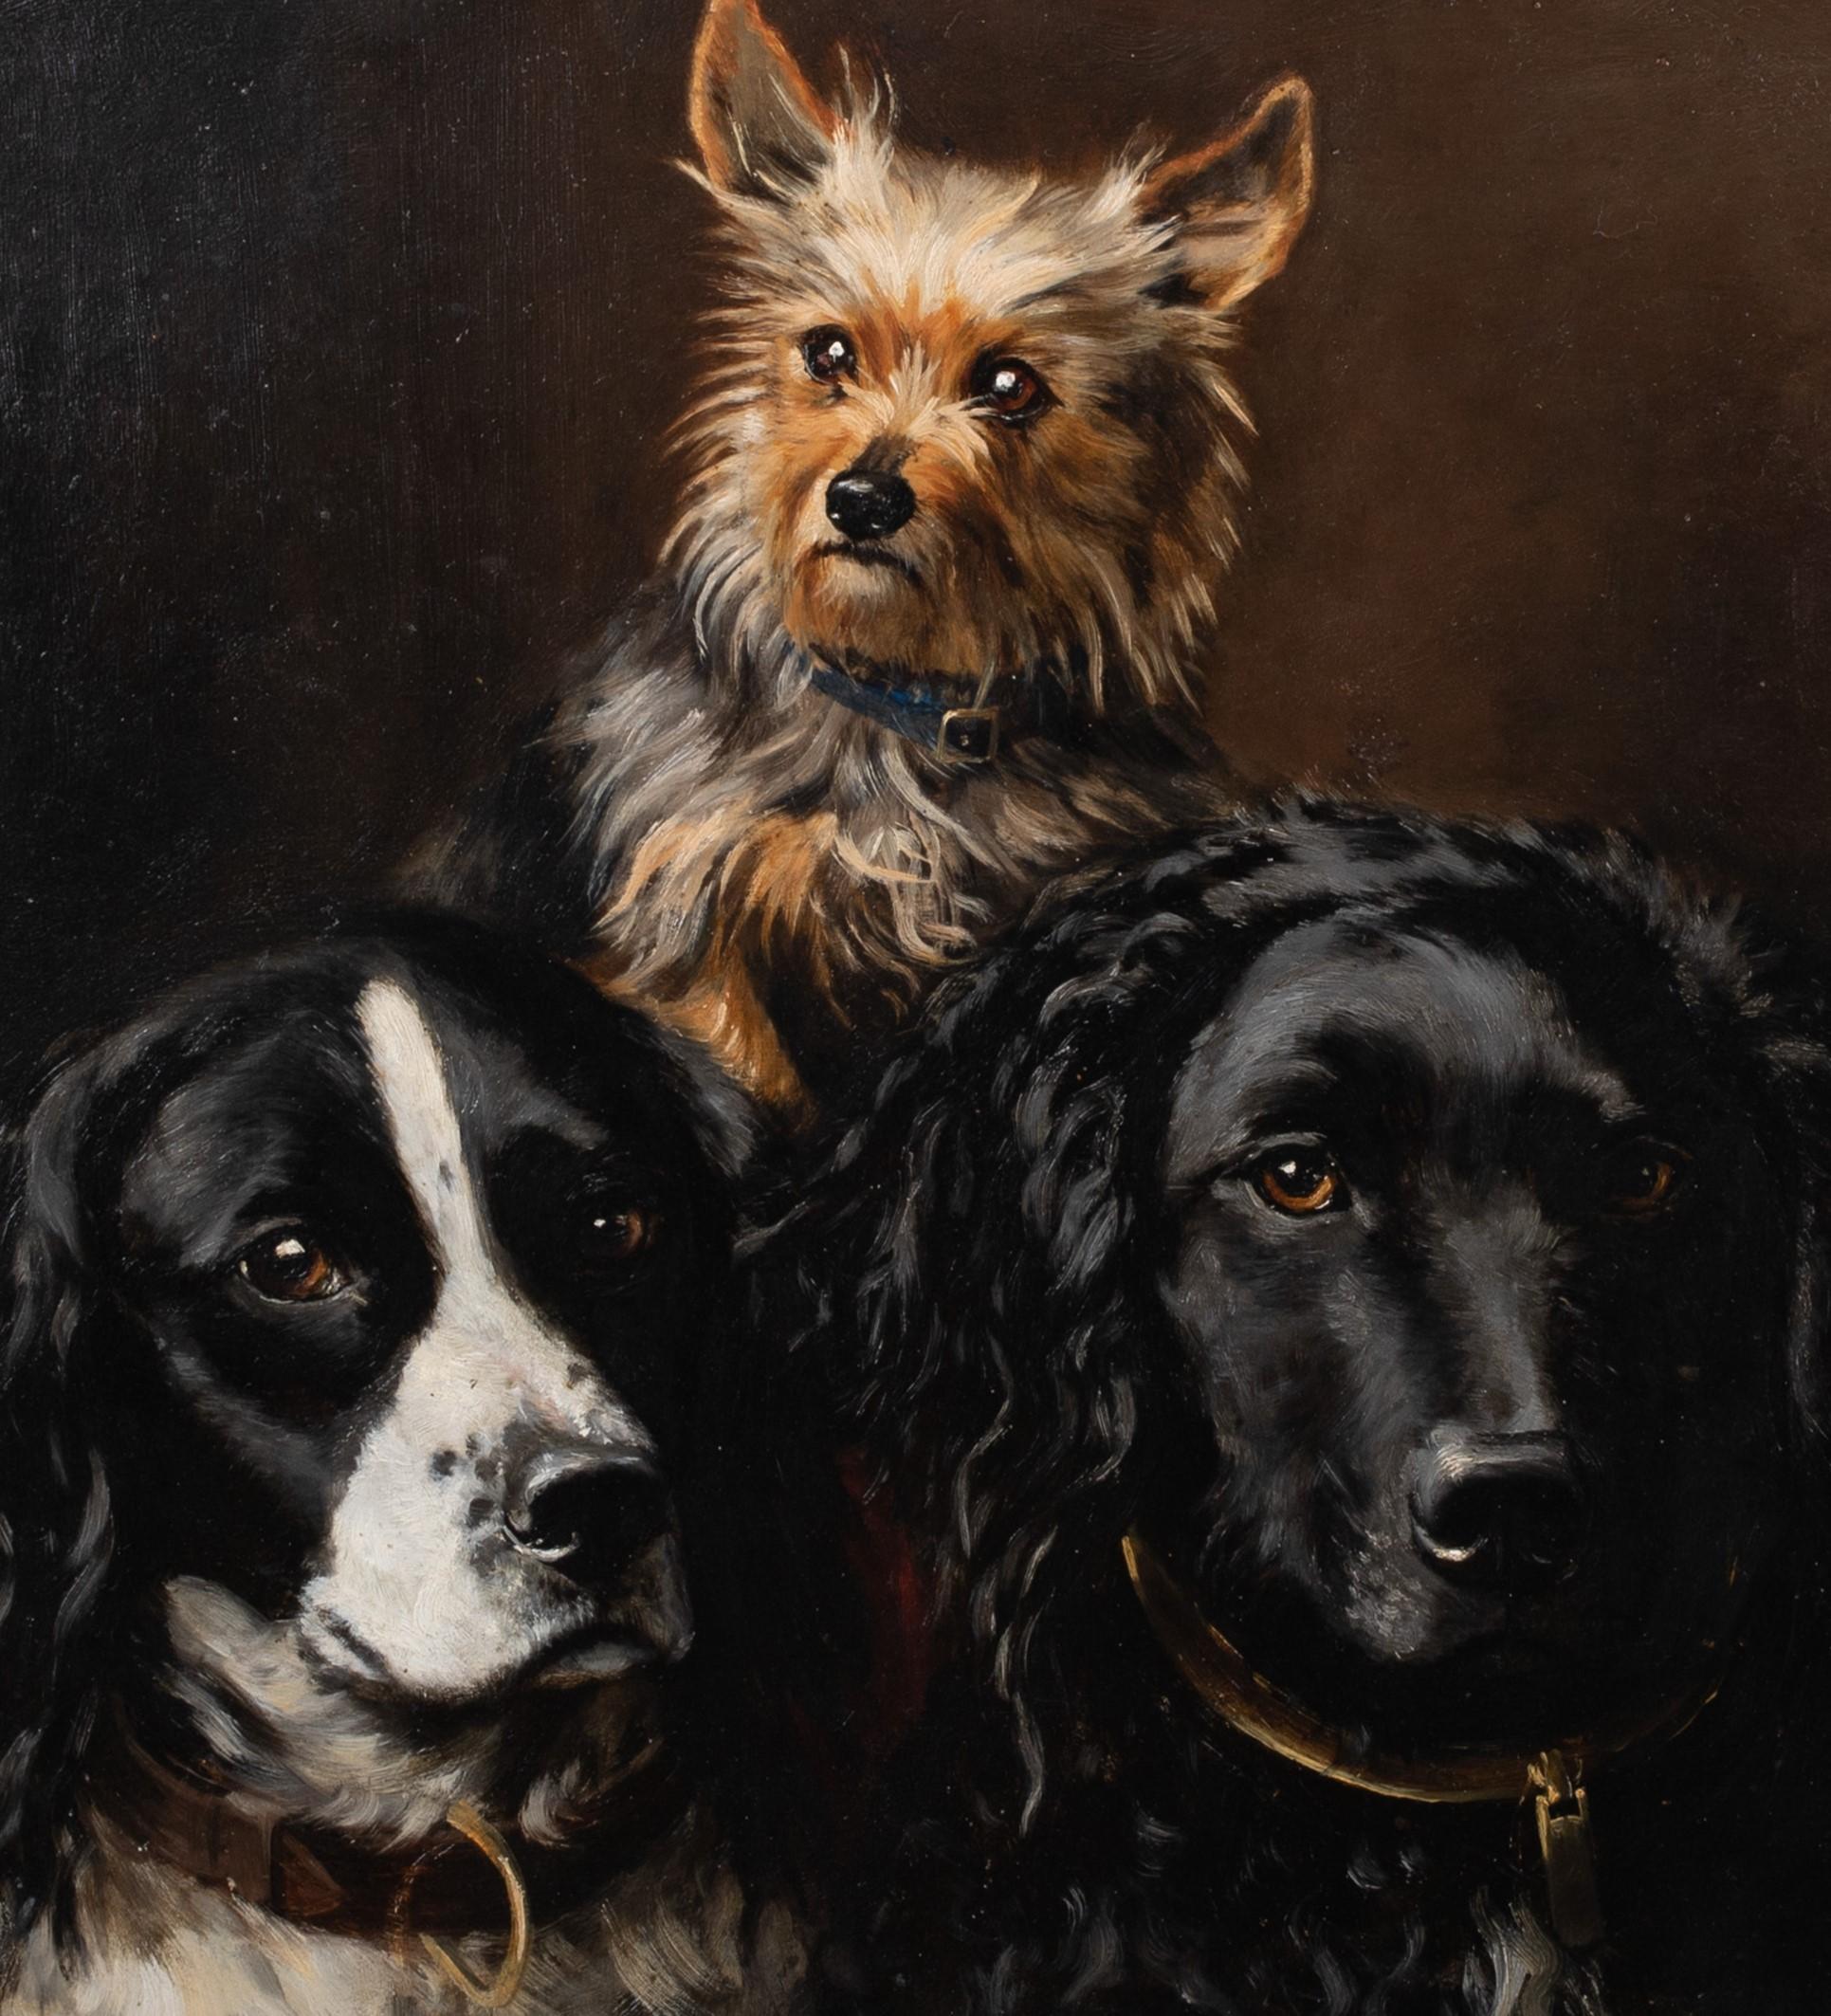 Portrait Of Two Spaniels & A Yorkshire Terrier, dated 1882

